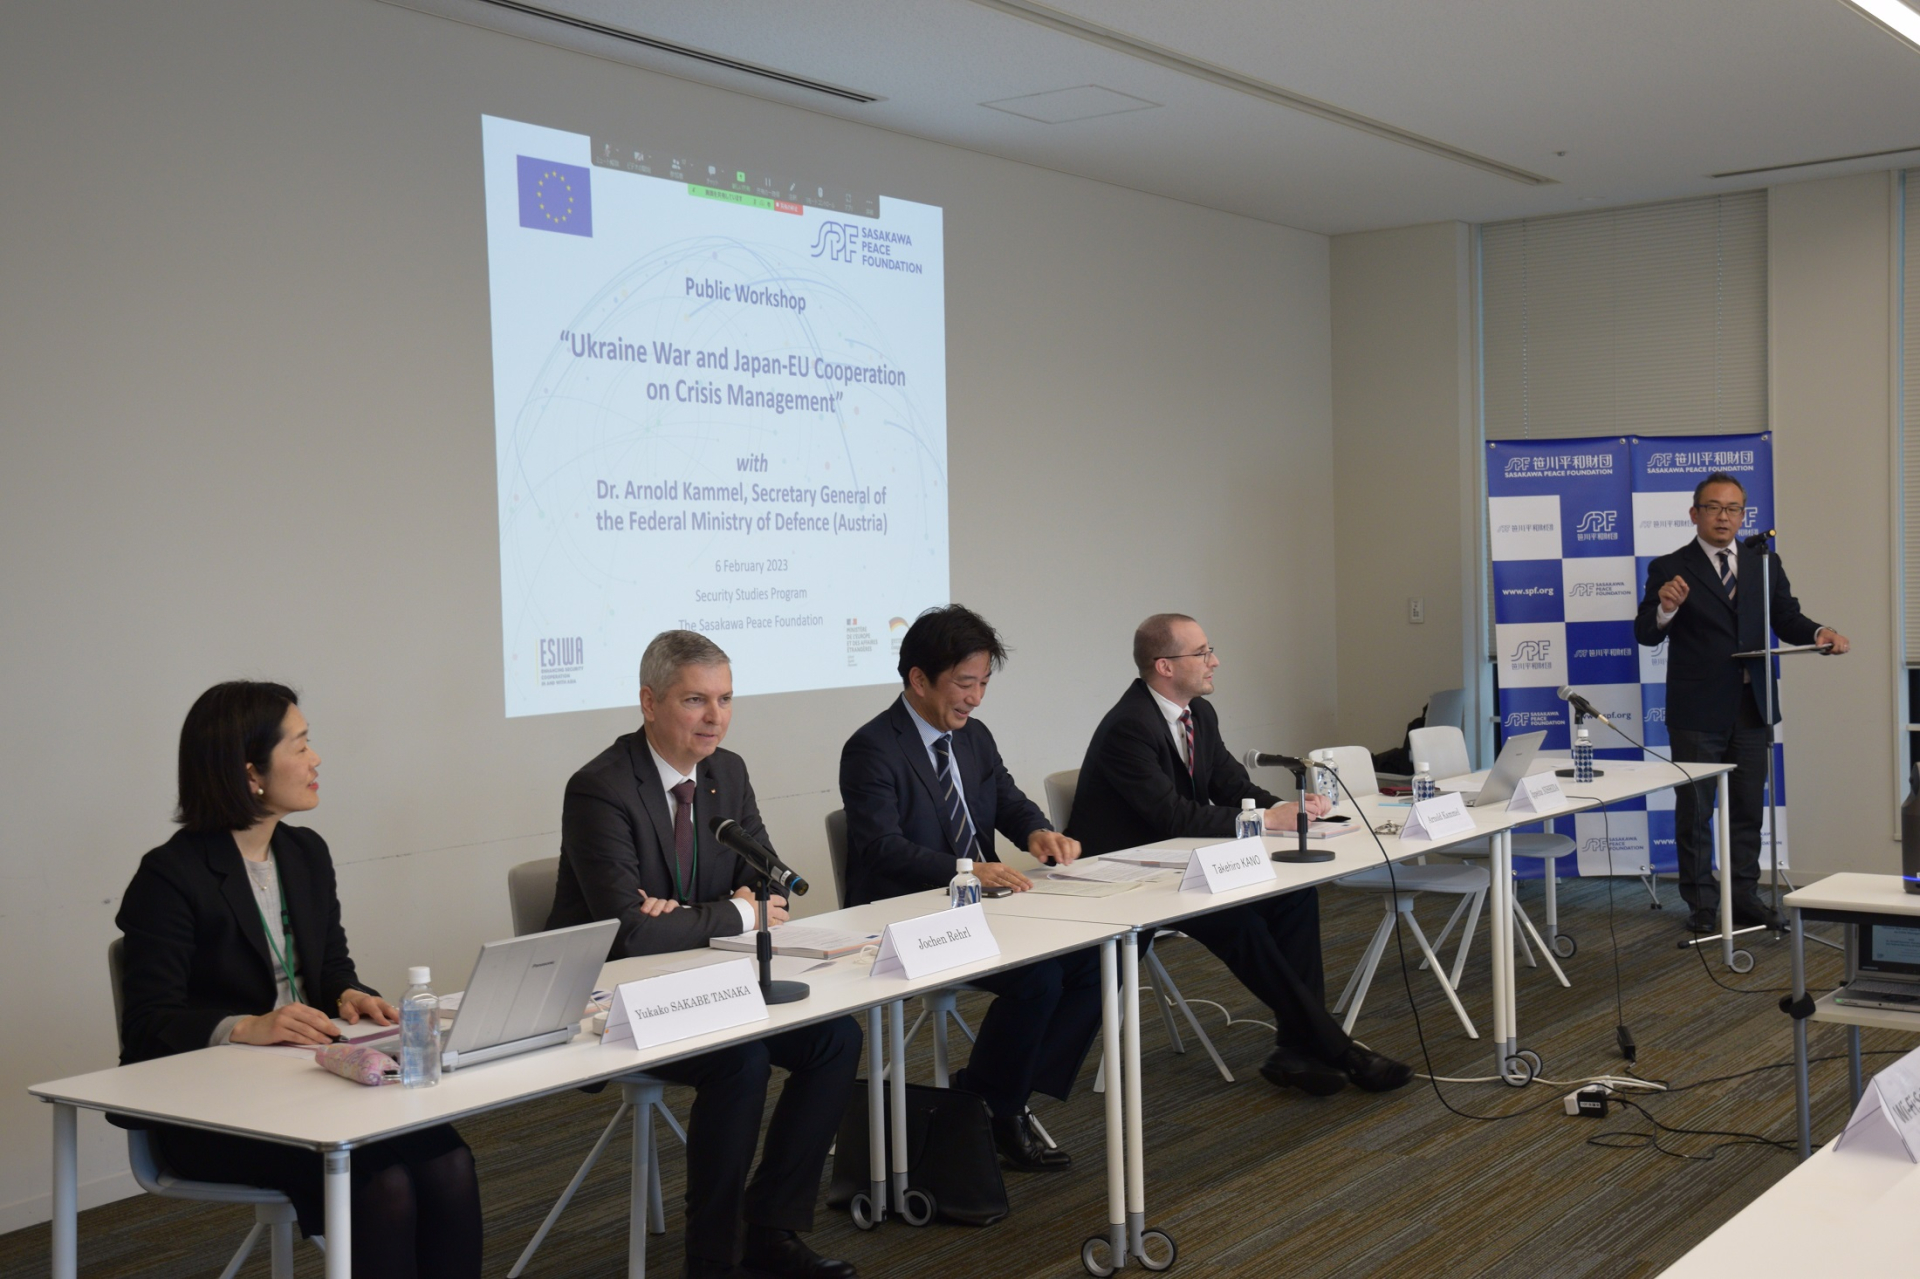 “Ukraine War and Japan-EU Cooperation on Crisis Management”<br>Considering further cooperation in a changing world